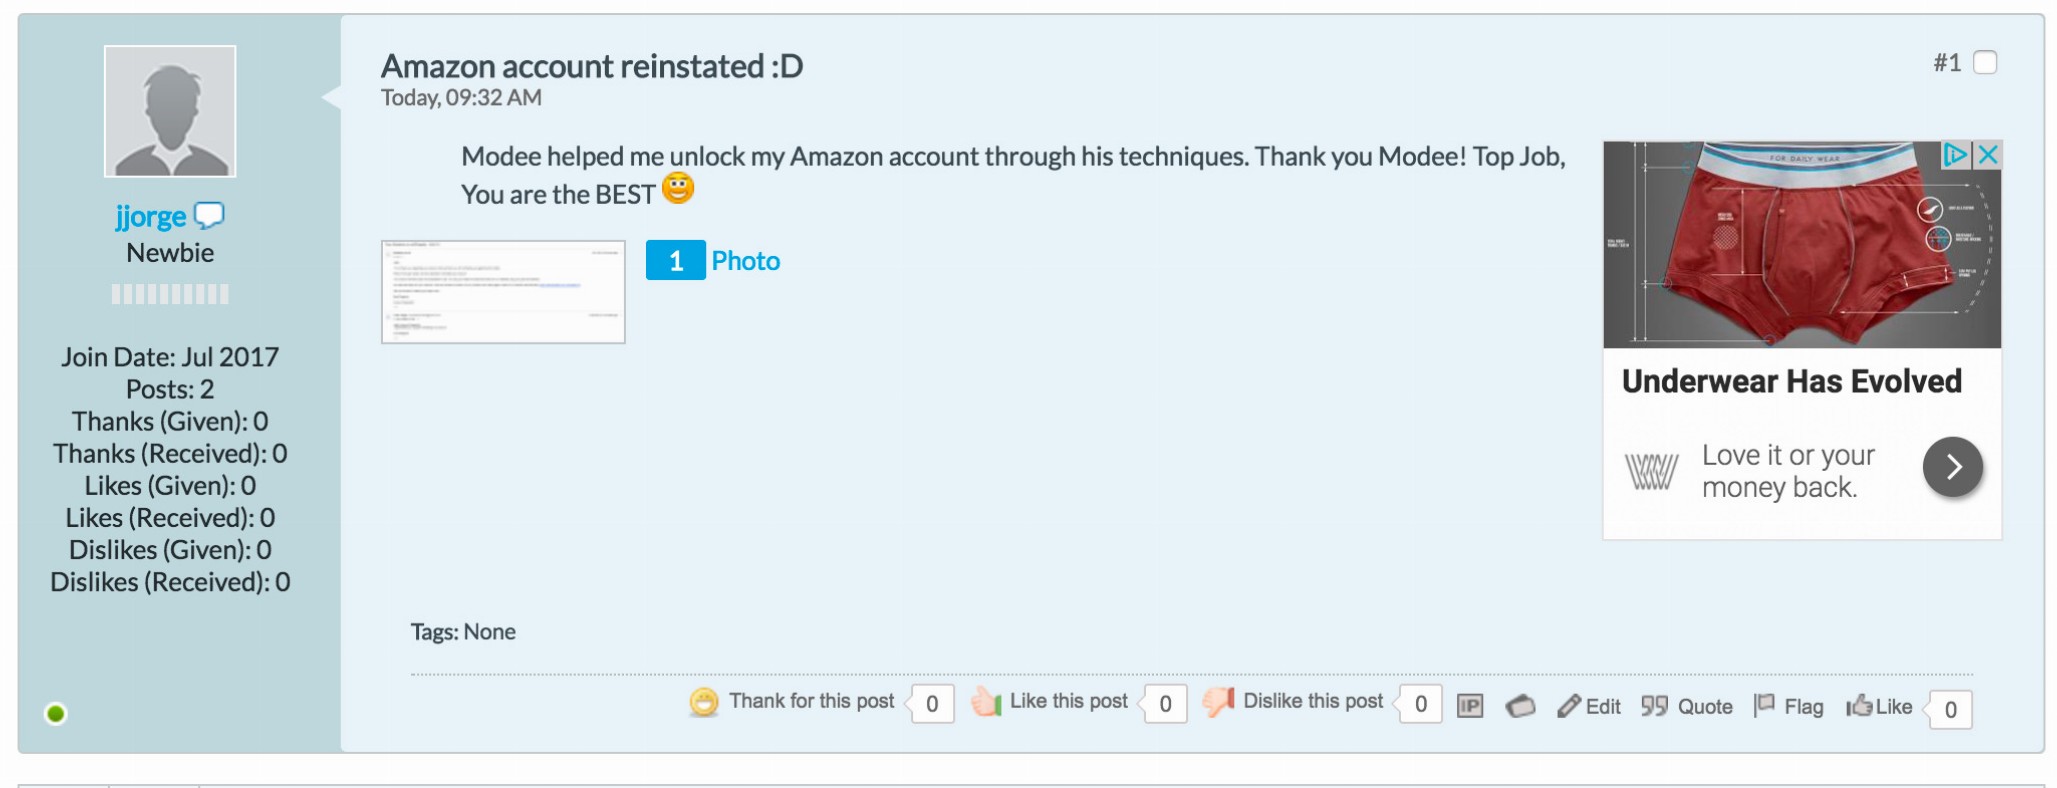 Click image for larger version  Name:	AMZN_account_reinstated.jpg Views:	1 Size:	148.9 KB ID:	75229